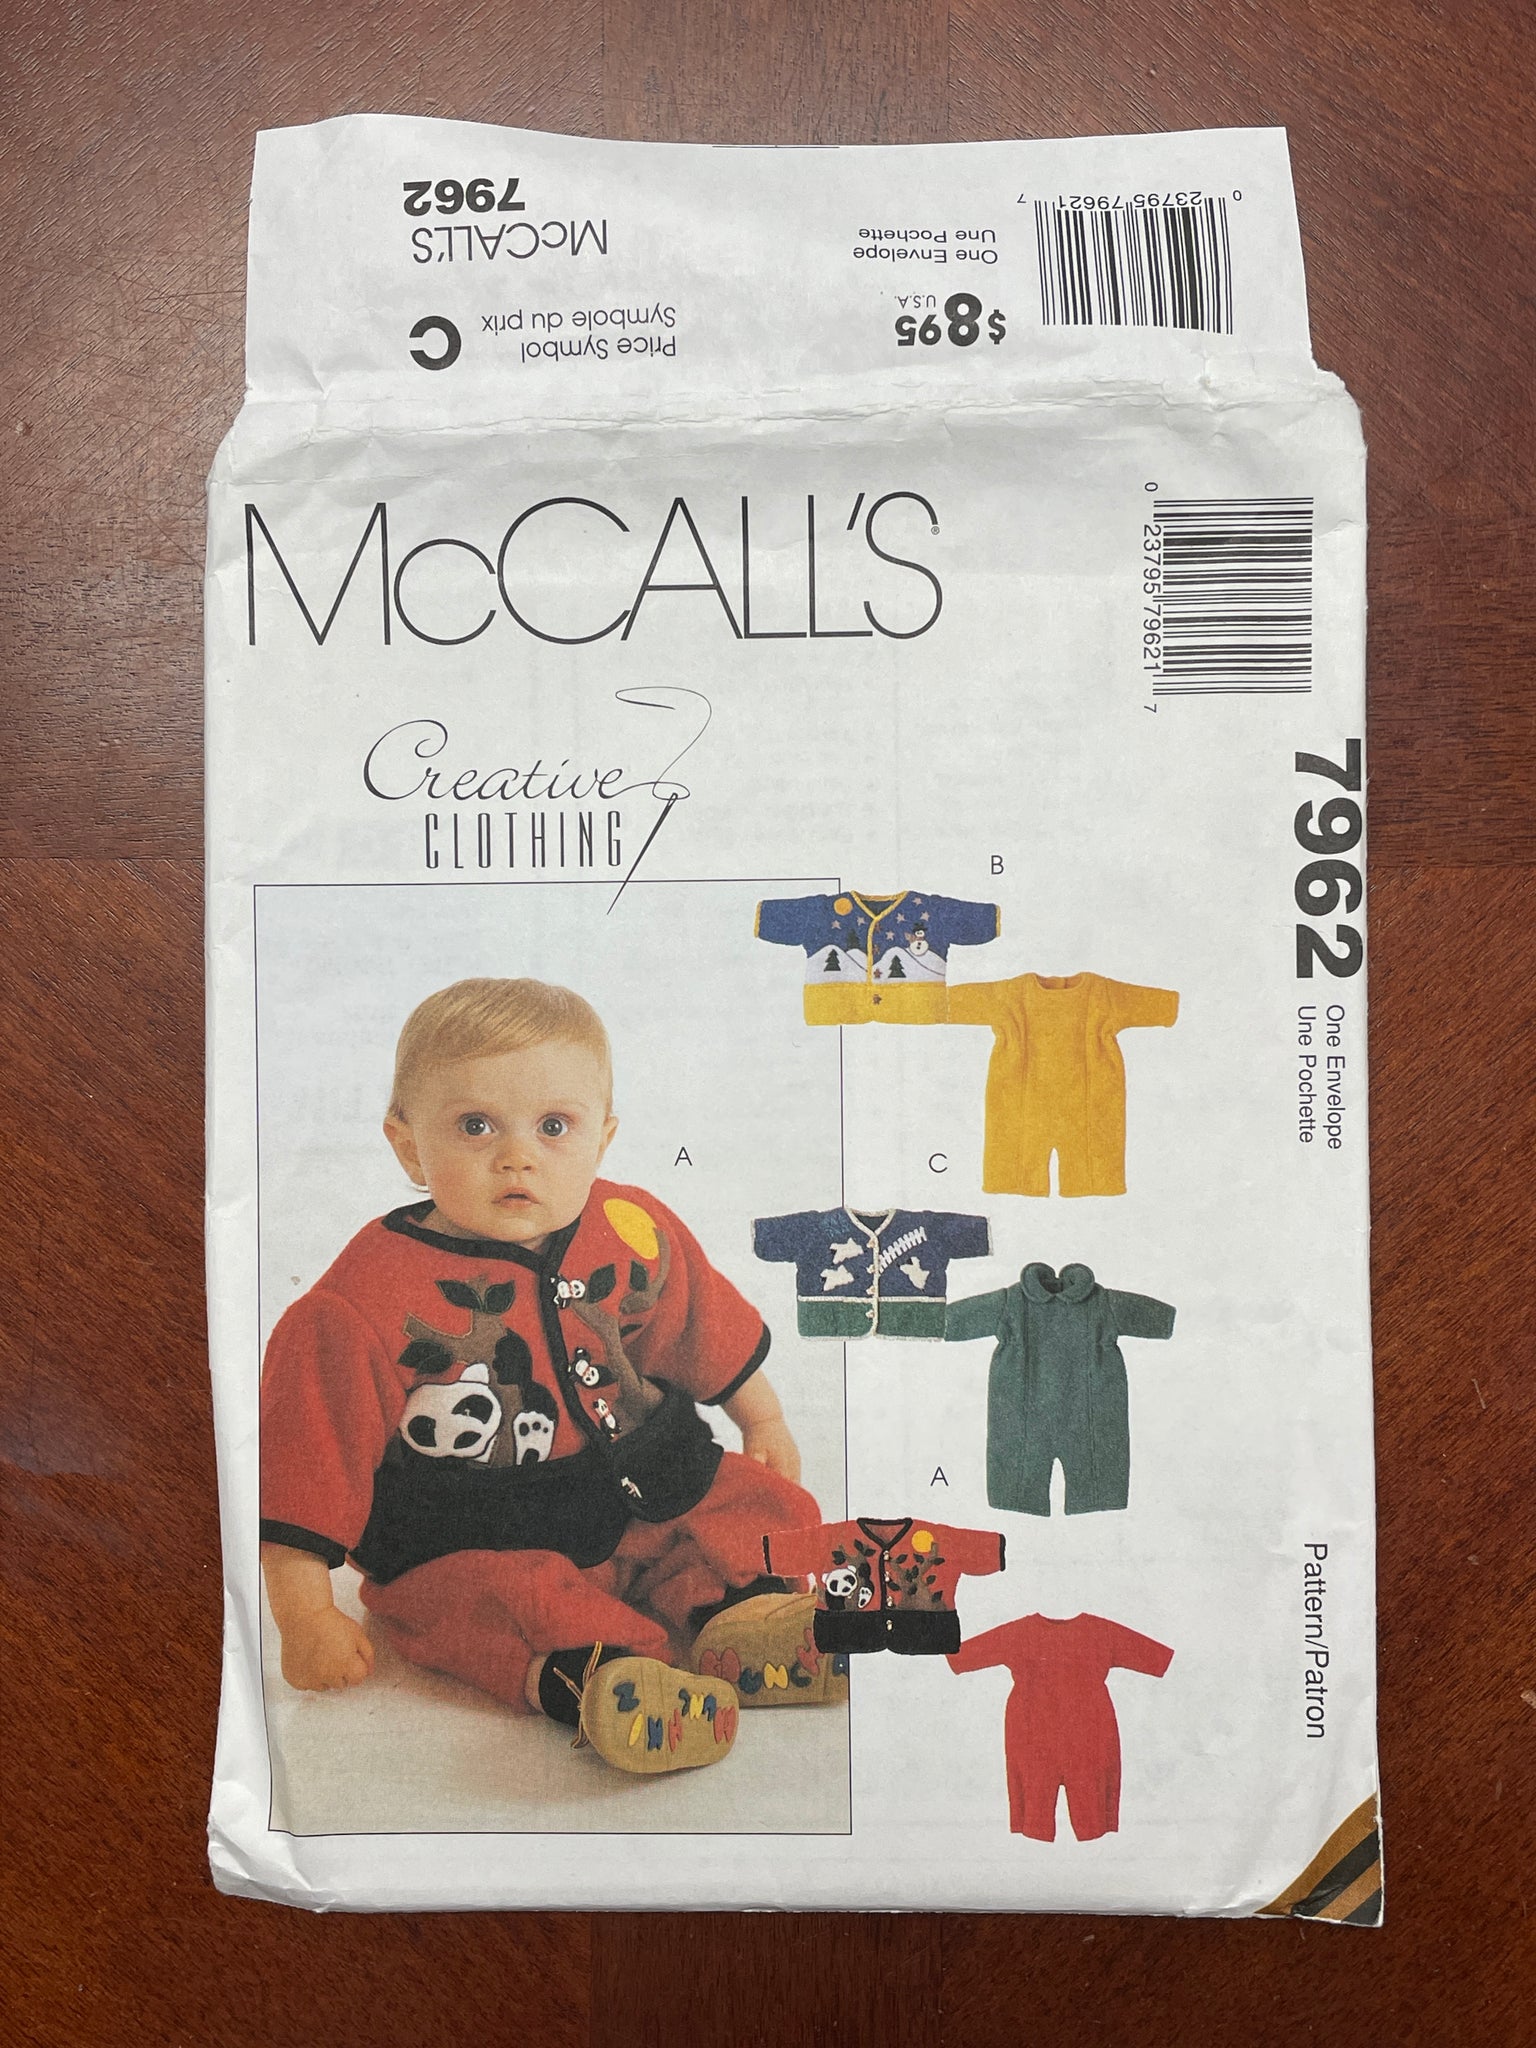 1995 McCall's 7962 Pattern - Infant Jumpsuit and Jacket with Appliques FACTORY FOLDED